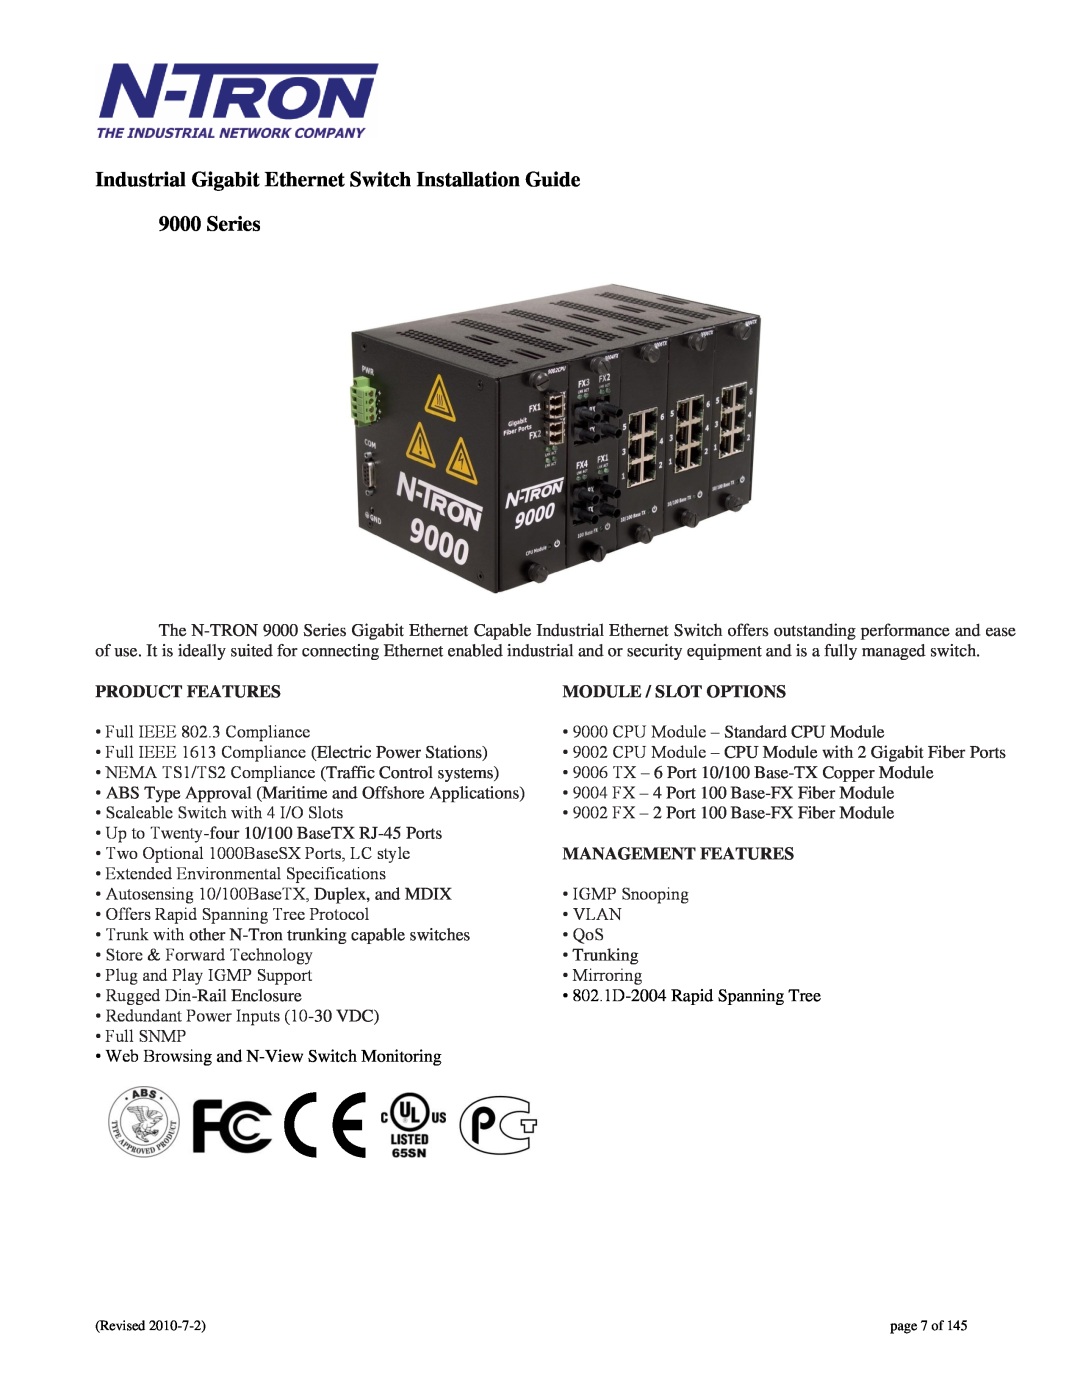 N-Tron Industrial Gigabit Ethernet Switch Installation Guide 9000 Series, Product Features, Module / Slot Options 